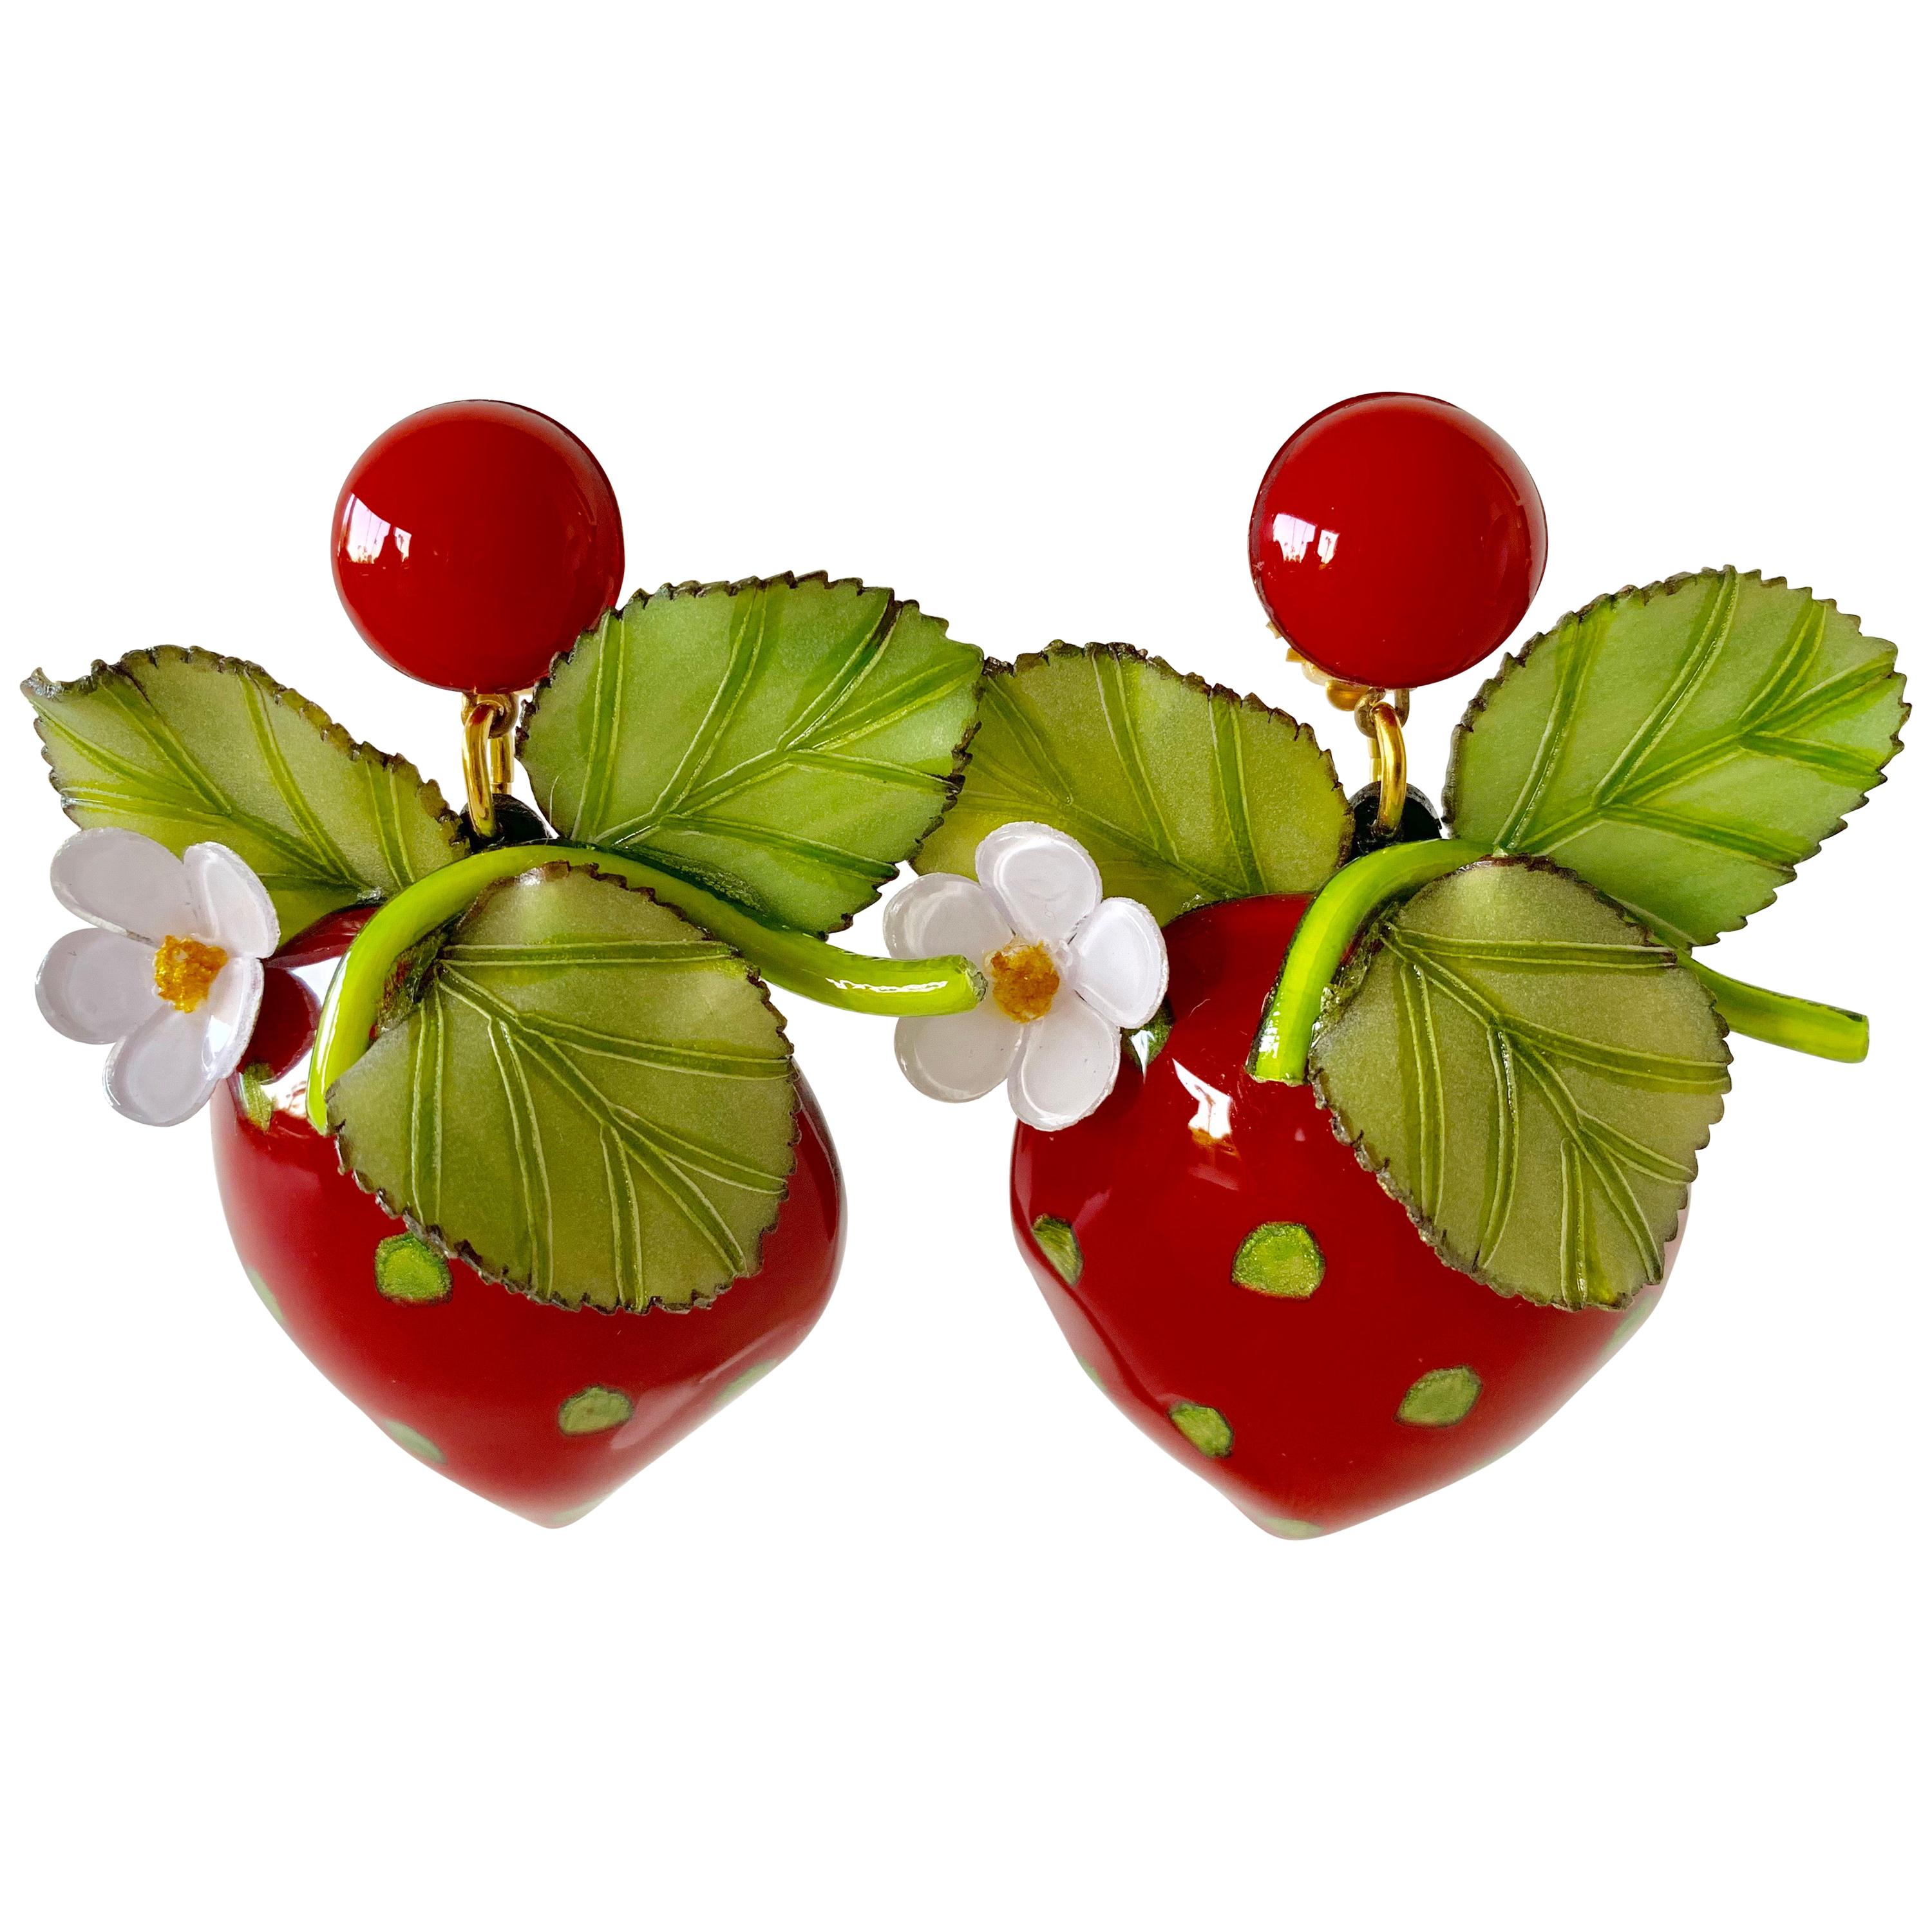 Oversized French Strawberry Statement Earrings 